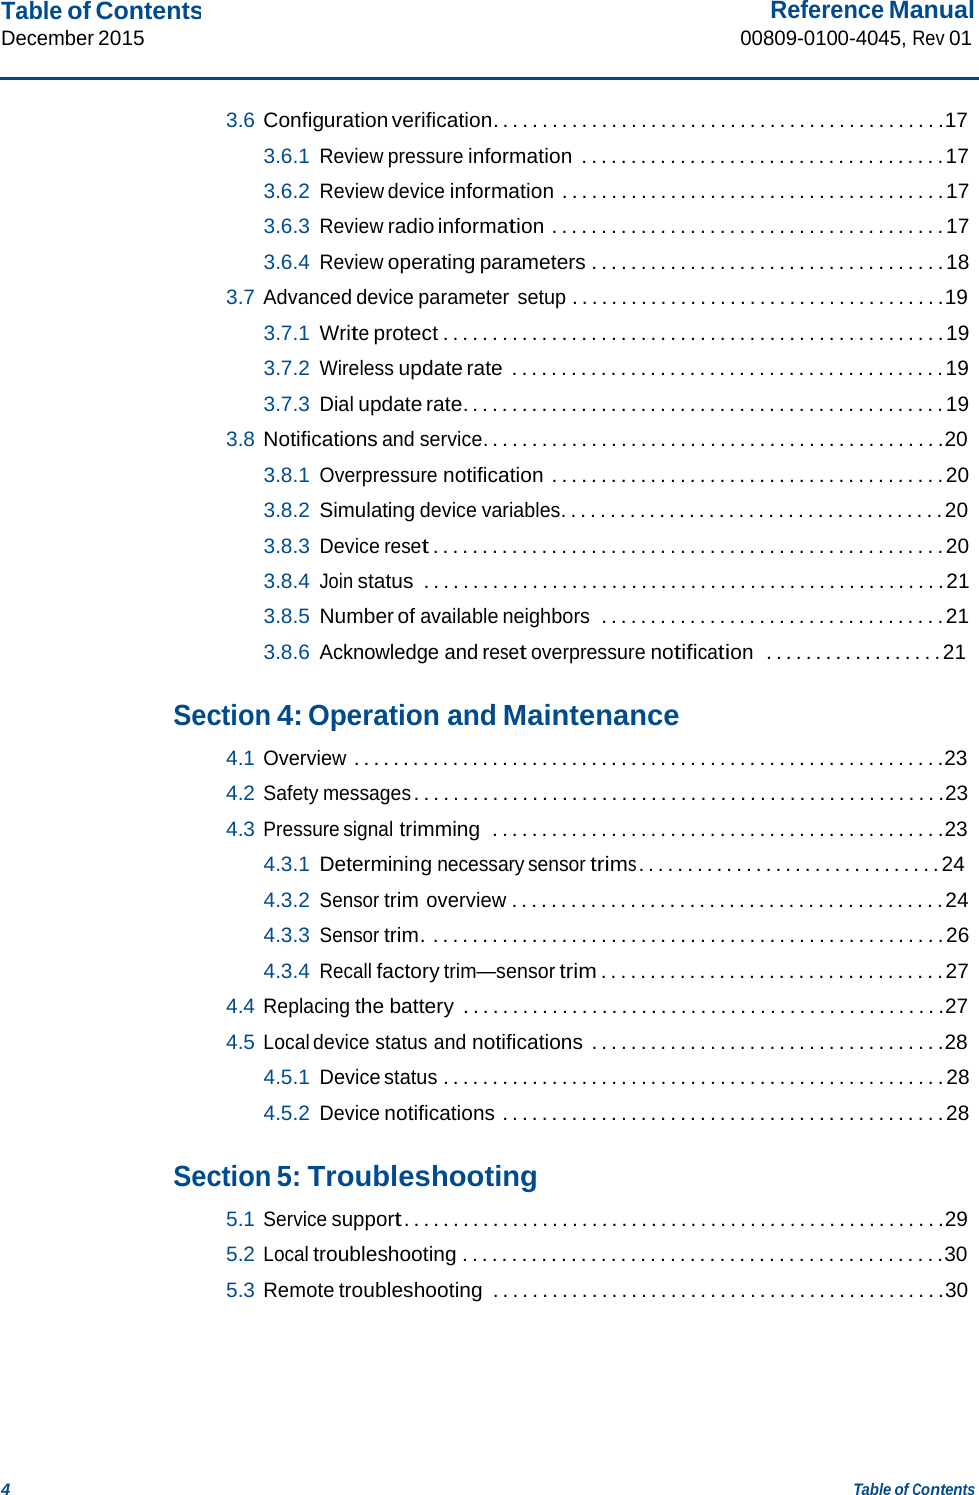 Table of Contents December 2015 Reference Manual 00809-0100-4045, Rev 01 4 Table of Contents    3.6 Configuration verification. . . . . . . . . . . . . . . . . . . . . . . . . . . . . . . . . . . . . . . . . . . . . .17  3.6.1 Review pressure information . . . . . . . . . . . . . . . . . . . . . . . . . . . . . . . . . . . . . 17  3.6.2 Review device information . . . . . . . . . . . . . . . . . . . . . . . . . . . . . . . . . . . . . . . 17  3.6.3 Review radio information . . . . . . . . . . . . . . . . . . . . . . . . . . . . . . . . . . . . . . . . 17  3.6.4 Review operating parameters . . . . . . . . . . . . . . . . . . . . . . . . . . . . . . . . . . . . 18  3.7 Advanced device parameter setup . . . . . . . . . . . . . . . . . . . . . . . . . . . . . . . . . . . . . .19  3.7.1  Write protect . . . . . . . . . . . . . . . . . . . . . . . . . . . . . . . . . . . . . . . . . . . . . . . . . . . 19  3.7.2 Wireless update rate . . . . . . . . . . . . . . . . . . . . . . . . . . . . . . . . . . . . . . . . . . . . 19  3.7.3 Dial update rate. . . . . . . . . . . . . . . . . . . . . . . . . . . . . . . . . . . . . . . . . . . . . . . . . 19  3.8 Notifications and service. . . . . . . . . . . . . . . . . . . . . . . . . . . . . . . . . . . . . . . . . . . . . . .20  3.8.1 Overpressure notification . . . . . . . . . . . . . . . . . . . . . . . . . . . . . . . . . . . . . . . . 20  3.8.2 Simulating device variables. . . . . . . . . . . . . . . . . . . . . . . . . . . . . . . . . . . . . . . 20  3.8.3 Device reset . . . . . . . . . . . . . . . . . . . . . . . . . . . . . . . . . . . . . . . . . . . . . . . . . . . . 20  3.8.4 Join status  . . . . . . . . . . . . . . . . . . . . . . . . . . . . . . . . . . . . . . . . . . . . . . . . . . . . . 21  3.8.5  Number of available neighbors  . . . . . . . . . . . . . . . . . . . . . . . . . . . . . . . . . . . 21  3.8.6 Acknowledge and reset overpressure notification  . . . . . . . . . . . . . . . . . . 21   Section 4: Operation and Maintenance  4.1 Overview . . . . . . . . . . . . . . . . . . . . . . . . . . . . . . . . . . . . . . . . . . . . . . . . . . . . . . . . . . . .23  4.2 Safety messages . . . . . . . . . . . . . . . . . . . . . . . . . . . . . . . . . . . . . . . . . . . . . . . . . . . . . .23  4.3 Pressure signal trimming  . . . . . . . . . . . . . . . . . . . . . . . . . . . . . . . . . . . . . . . . . . . . . .23  4.3.1  Determining necessary sensor trims . . . . . . . . . . . . . . . . . . . . . . . . . . . . . . . 24  4.3.2 Sensor trim overview . . . . . . . . . . . . . . . . . . . . . . . . . . . . . . . . . . . . . . . . . . . . 24  4.3.3 Sensor trim. . . . . . . . . . . . . . . . . . . . . . . . . . . . . . . . . . . . . . . . . . . . . . . . . . . . . 26  4.3.4 Recall factory trim—sensor trim . . . . . . . . . . . . . . . . . . . . . . . . . . . . . . . . . . . 27  4.4 Replacing the battery  . . . . . . . . . . . . . . . . . . . . . . . . . . . . . . . . . . . . . . . . . . . . . . . . .27  4.5 Local device status and notifications . . . . . . . . . . . . . . . . . . . . . . . . . . . . . . . . . . . .28  4.5.1 Device status . . . . . . . . . . . . . . . . . . . . . . . . . . . . . . . . . . . . . . . . . . . . . . . . . . . 28  4.5.2 Device notifications . . . . . . . . . . . . . . . . . . . . . . . . . . . . . . . . . . . . . . . . . . . . . 28   Section 5: Troubleshooting  5.1 Service support . . . . . . . . . . . . . . . . . . . . . . . . . . . . . . . . . . . . . . . . . . . . . . . . . . . . . . .29  5.2 Local troubleshooting . . . . . . . . . . . . . . . . . . . . . . . . . . . . . . . . . . . . . . . . . . . . . . . . .30  5.3 Remote troubleshooting  . . . . . . . . . . . . . . . . . . . . . . . . . . . . . . . . . . . . . . . . . . . . . .30 